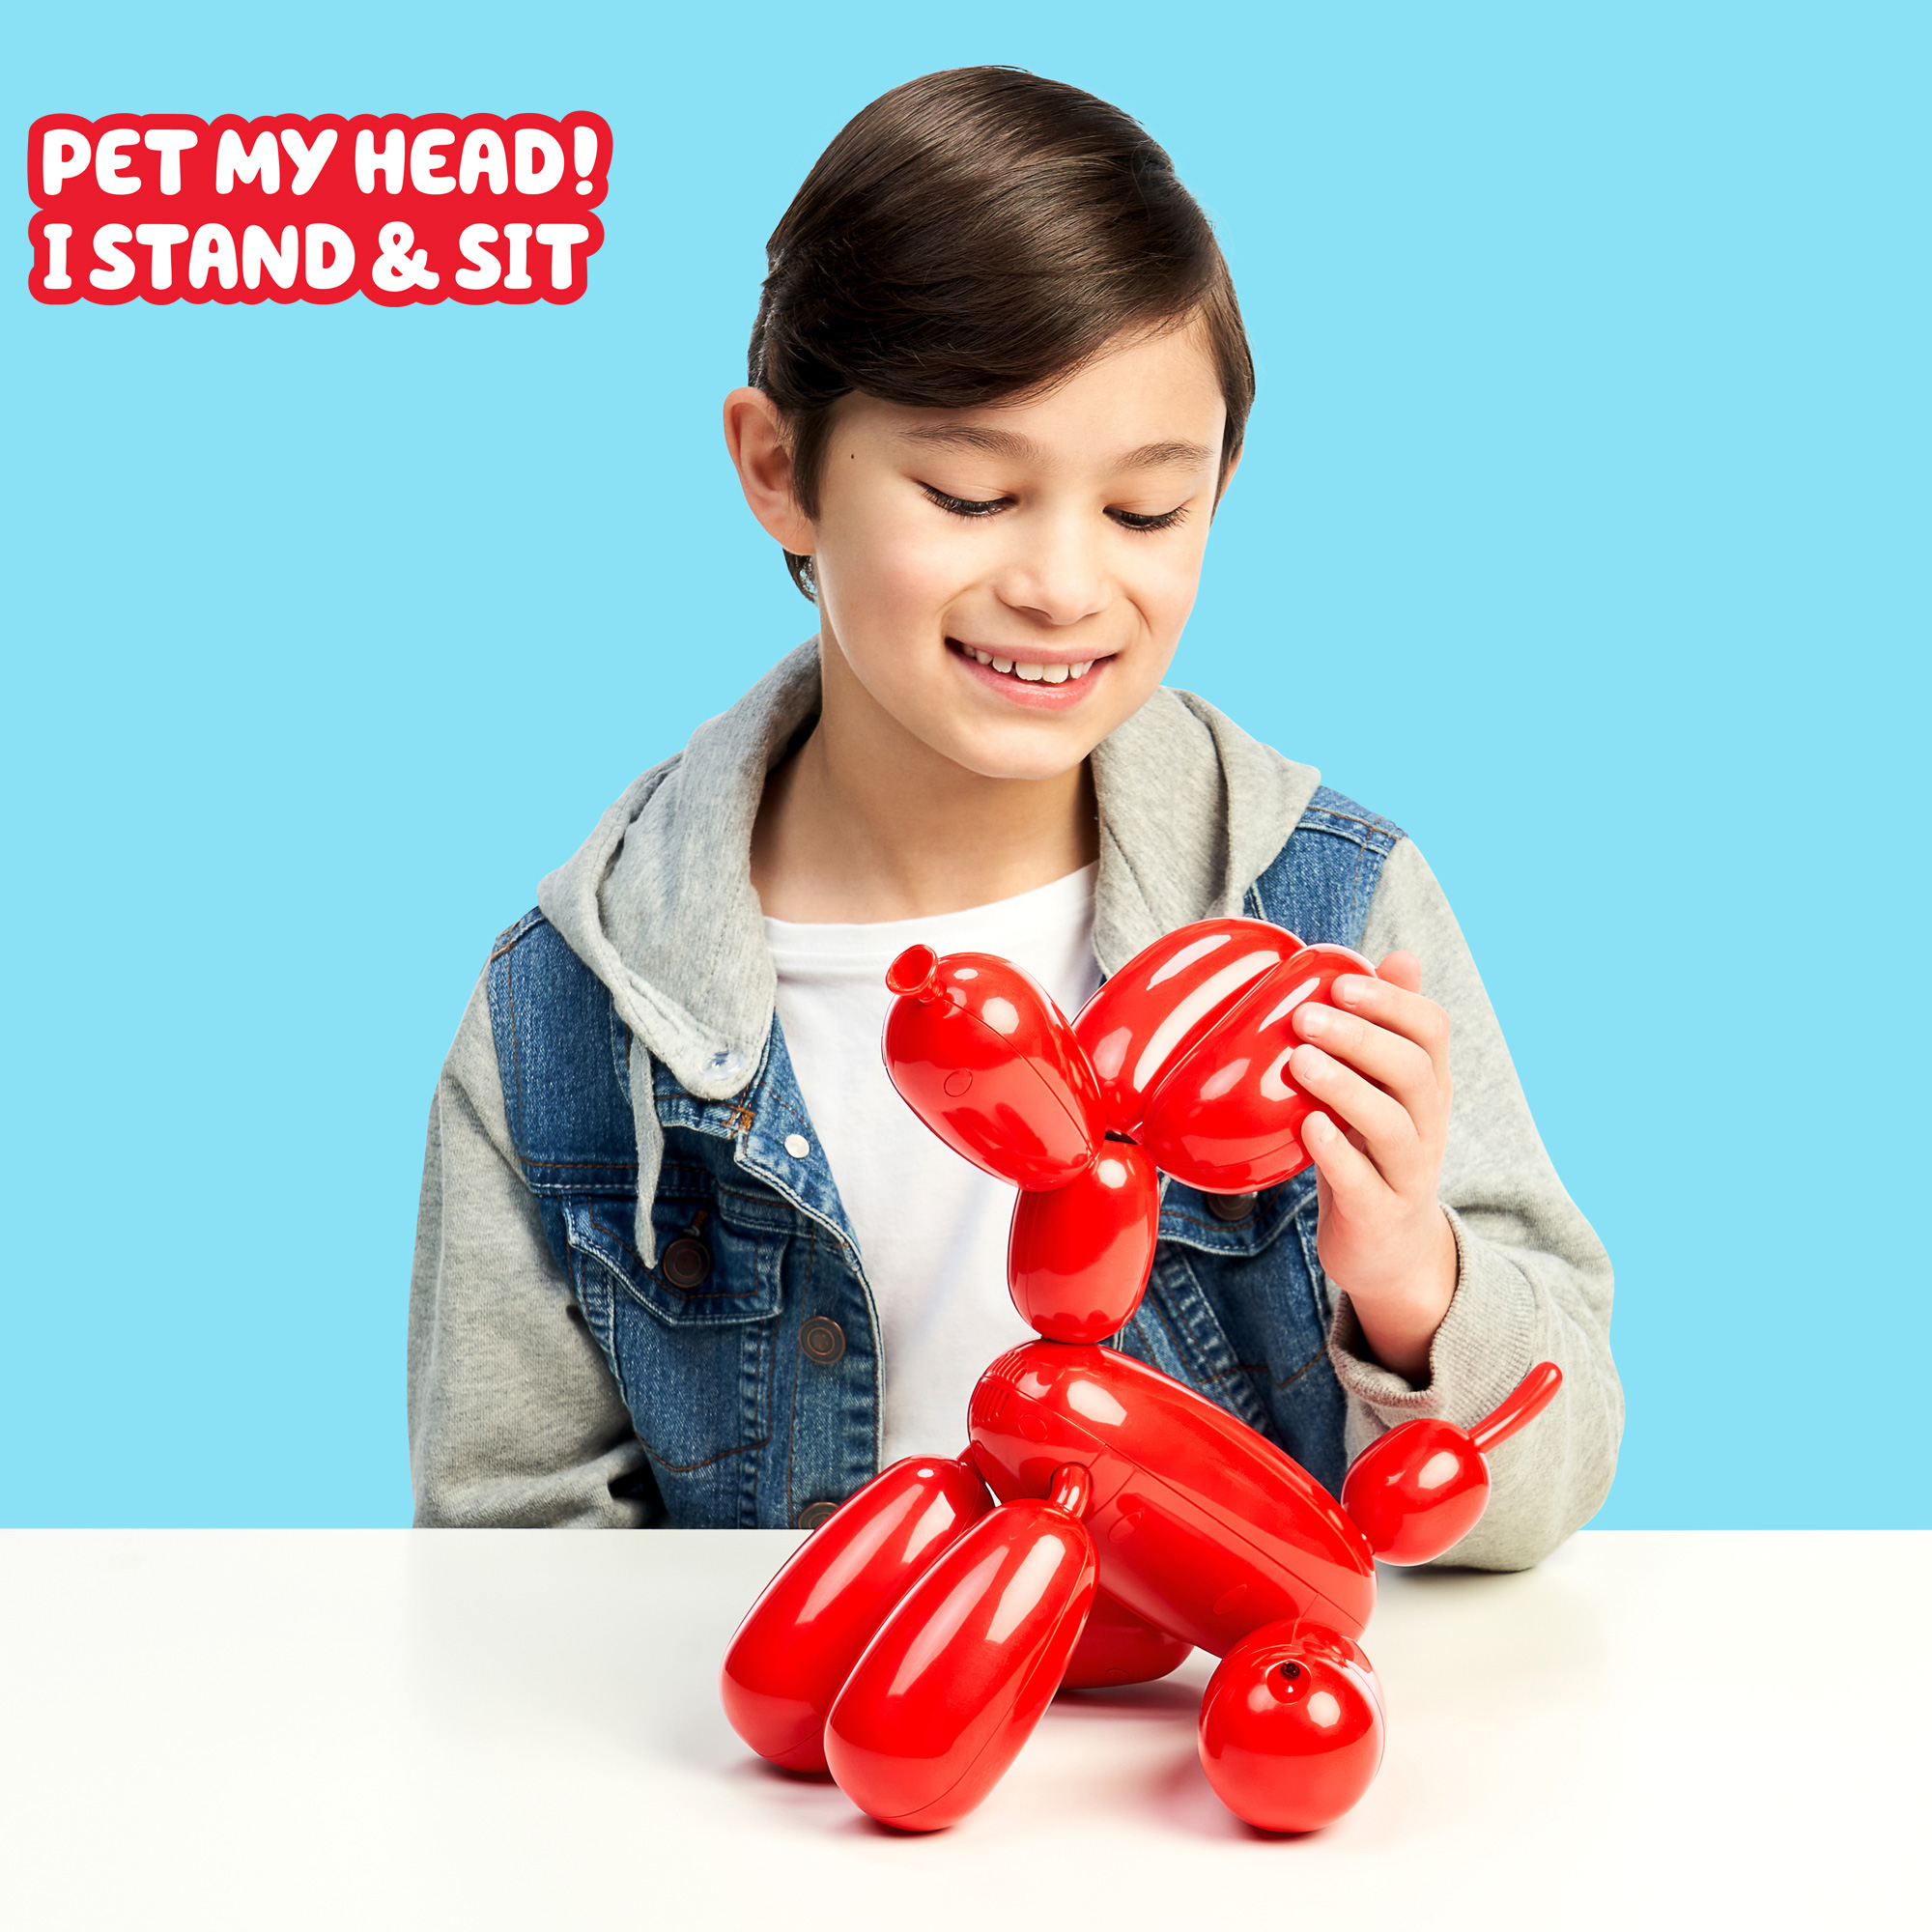 Squeakee the Balloon Dog - Makes Sound, Deflates, and Does Tricks! - Electronic Pets - image 4 of 17